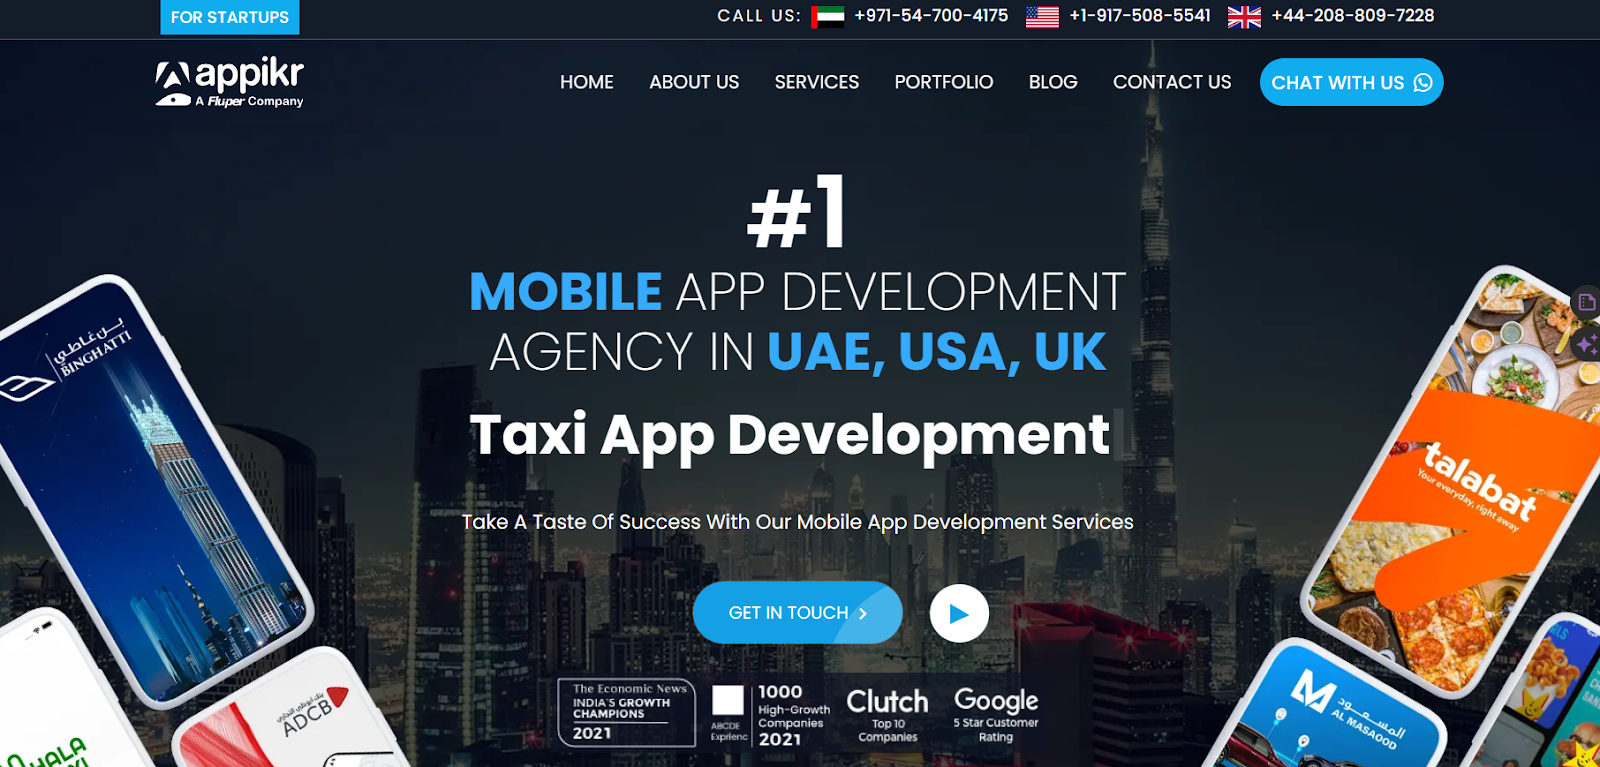 Appikr Labs Provides Mobile App Development Solutions For Brands And Companies With Objective To Generate Revenue In Billions Through “Fortune 500 Apps”